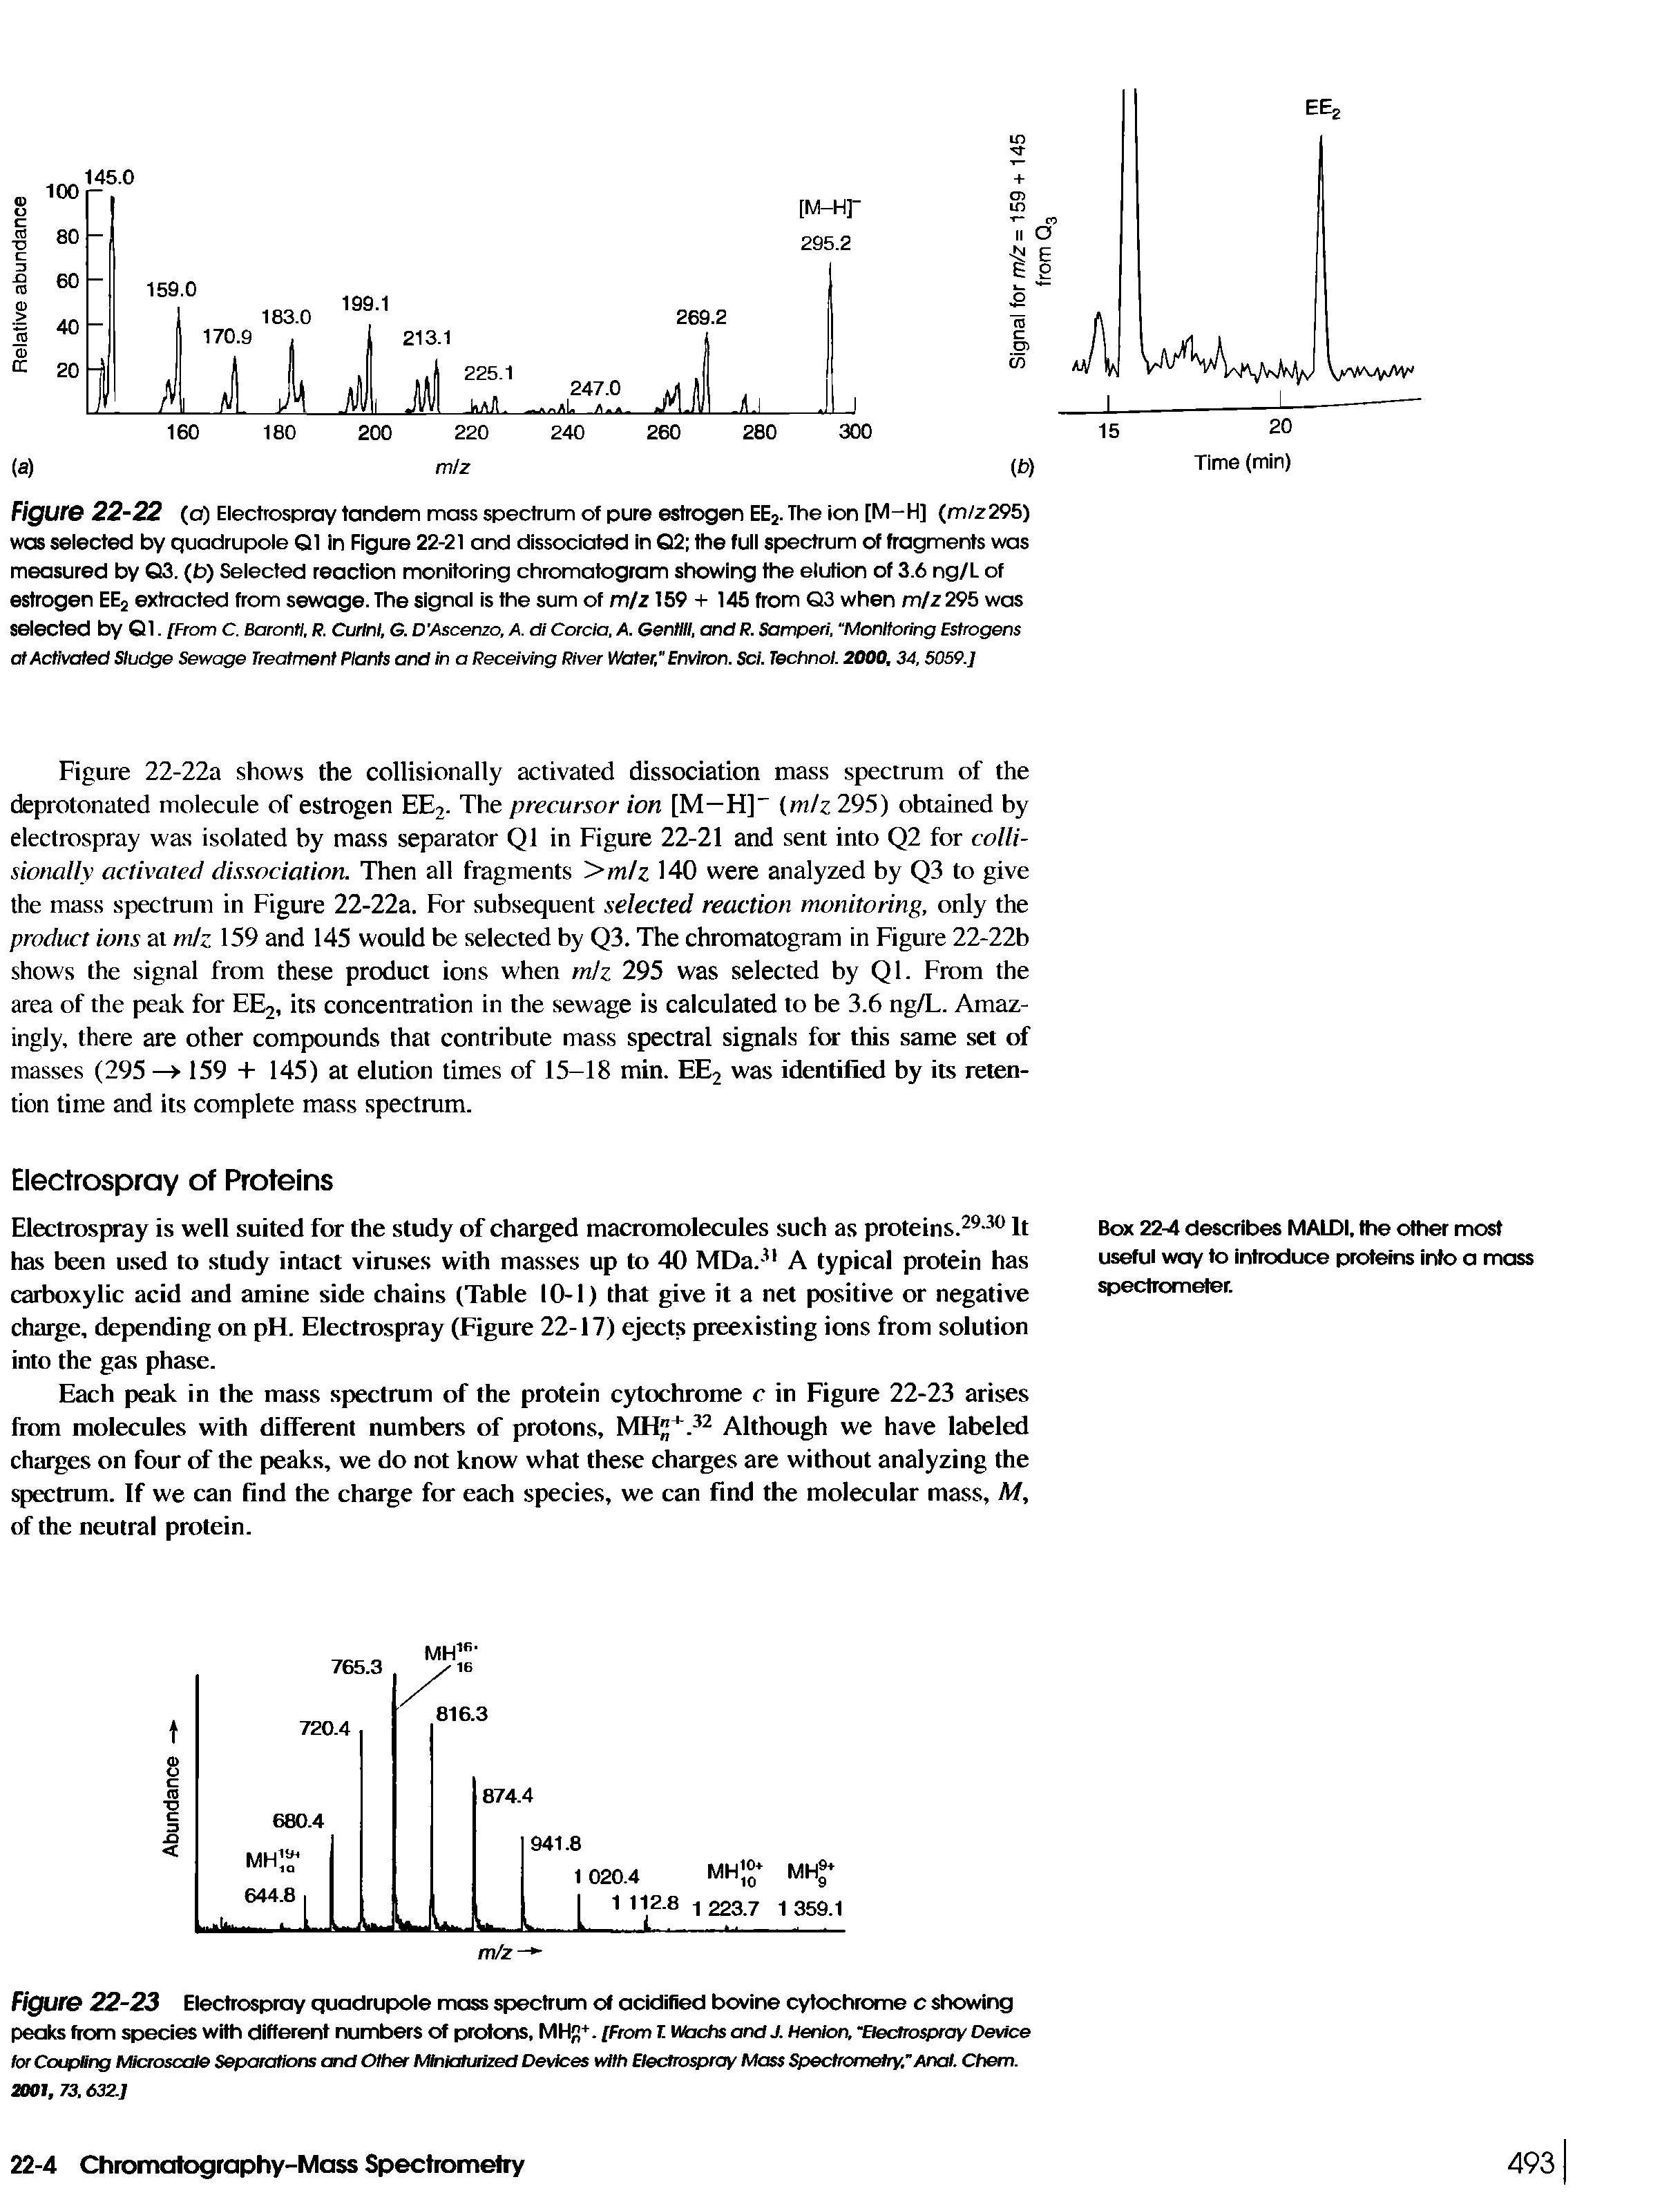 Figure 22-23 Electrospray quadrupole mass spectrum of acidified bovine cytochrome c showing peaks from species with different numbers of protons, MHfJ+. [From T. Wachs and J. Henion, Electrospray Device tor Coupling Microscale Separations and Other Miniaturized Devices with Electrospray Mass Spectrometry." Anal. Chem. 200T, 73, 632.]...